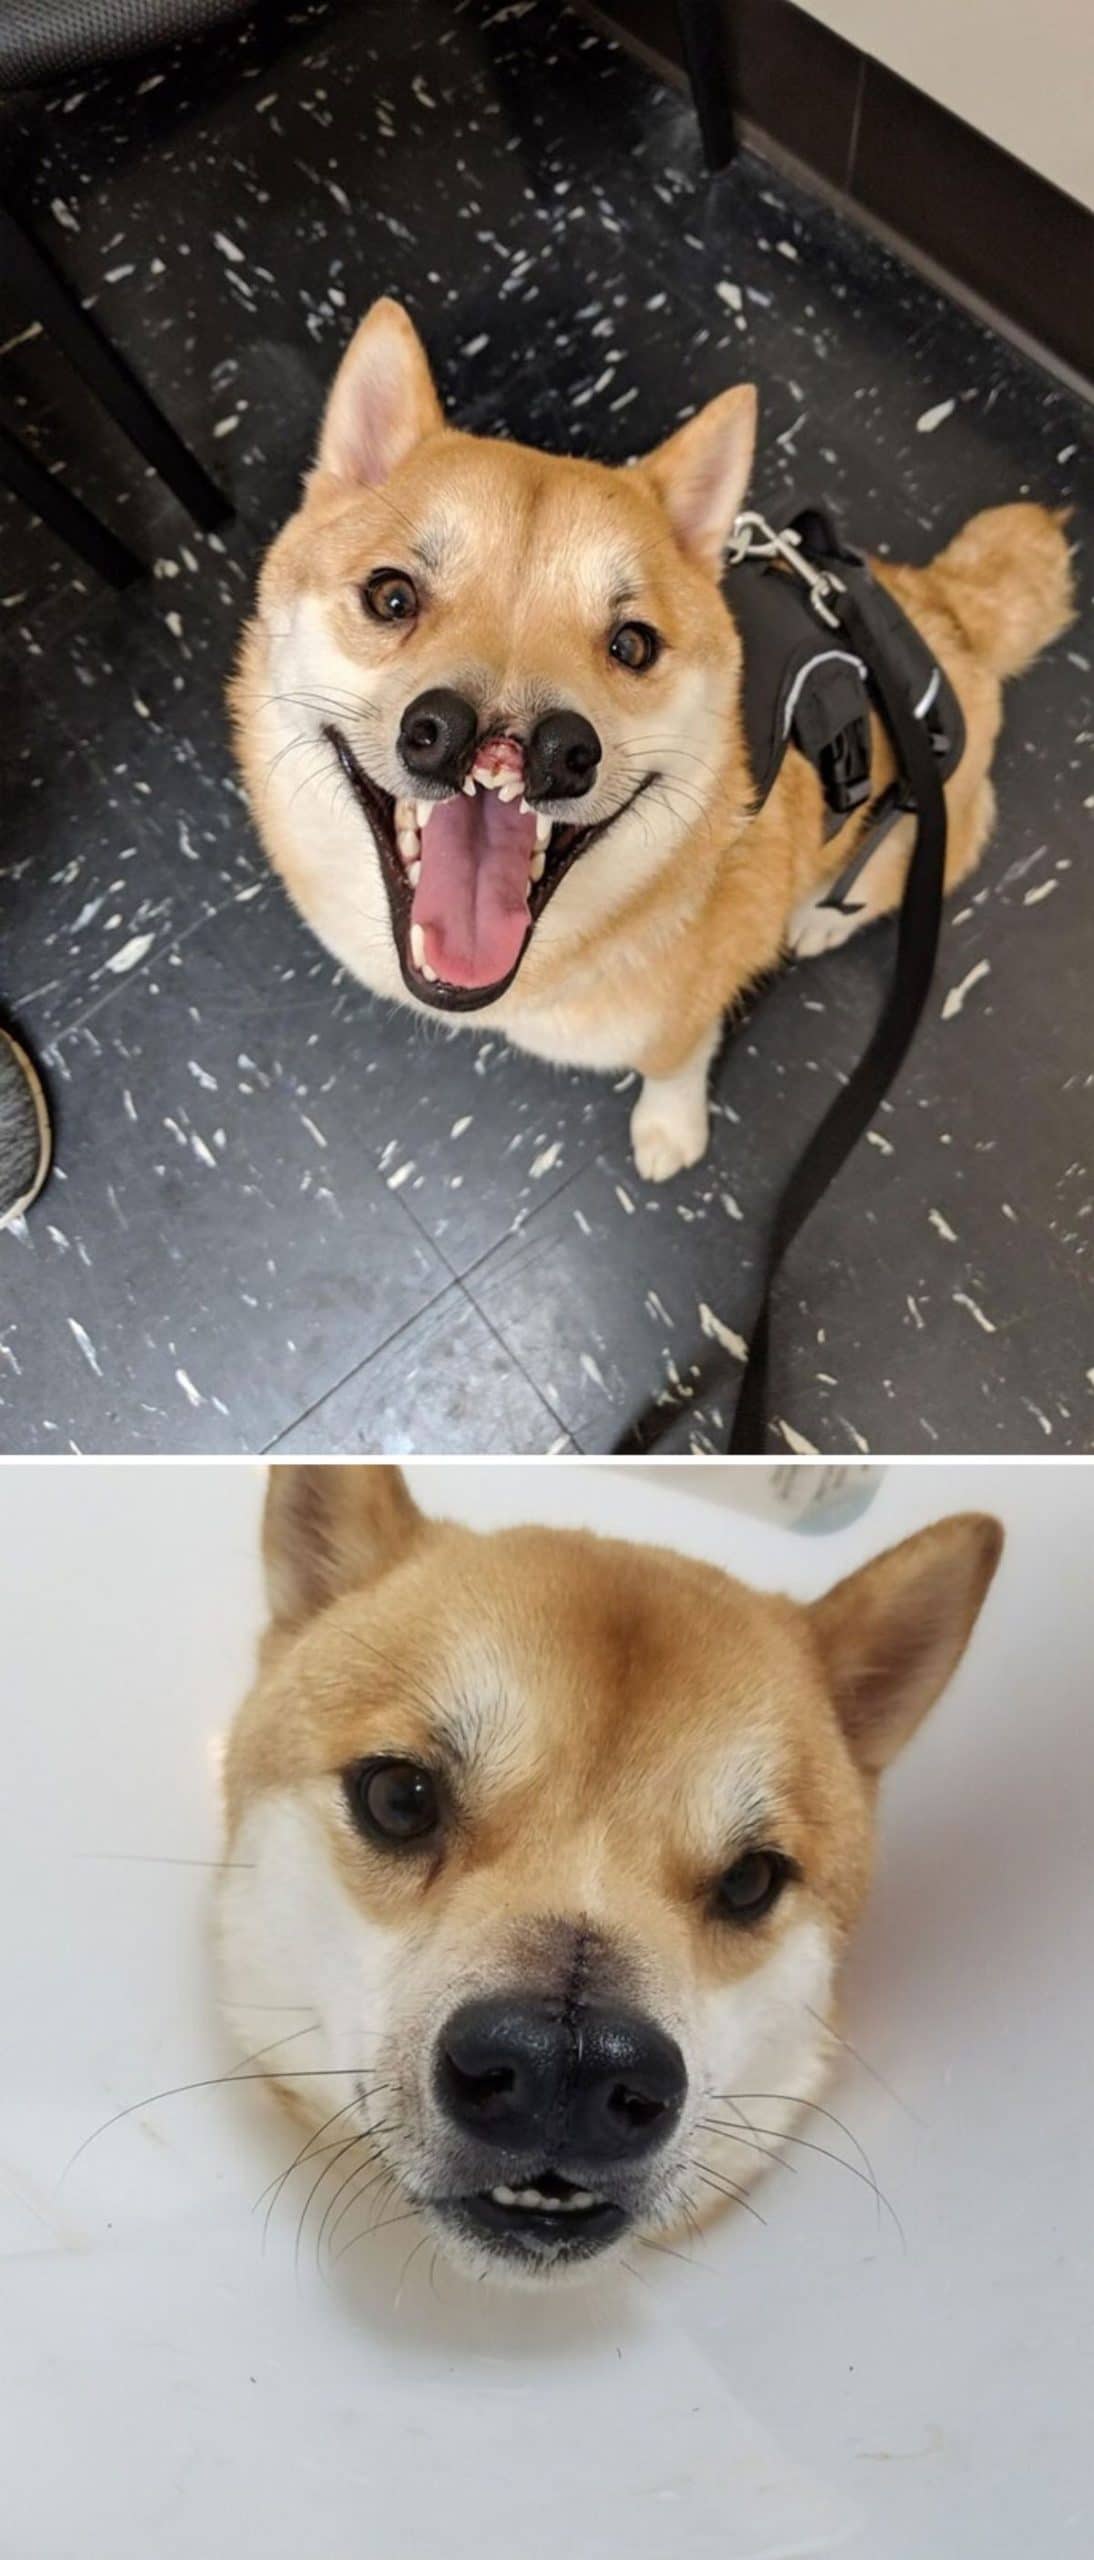 1 photo of a brown and white dog with a gap between the nostrils and teeth showing there and 1 photo of it fixed after surgery